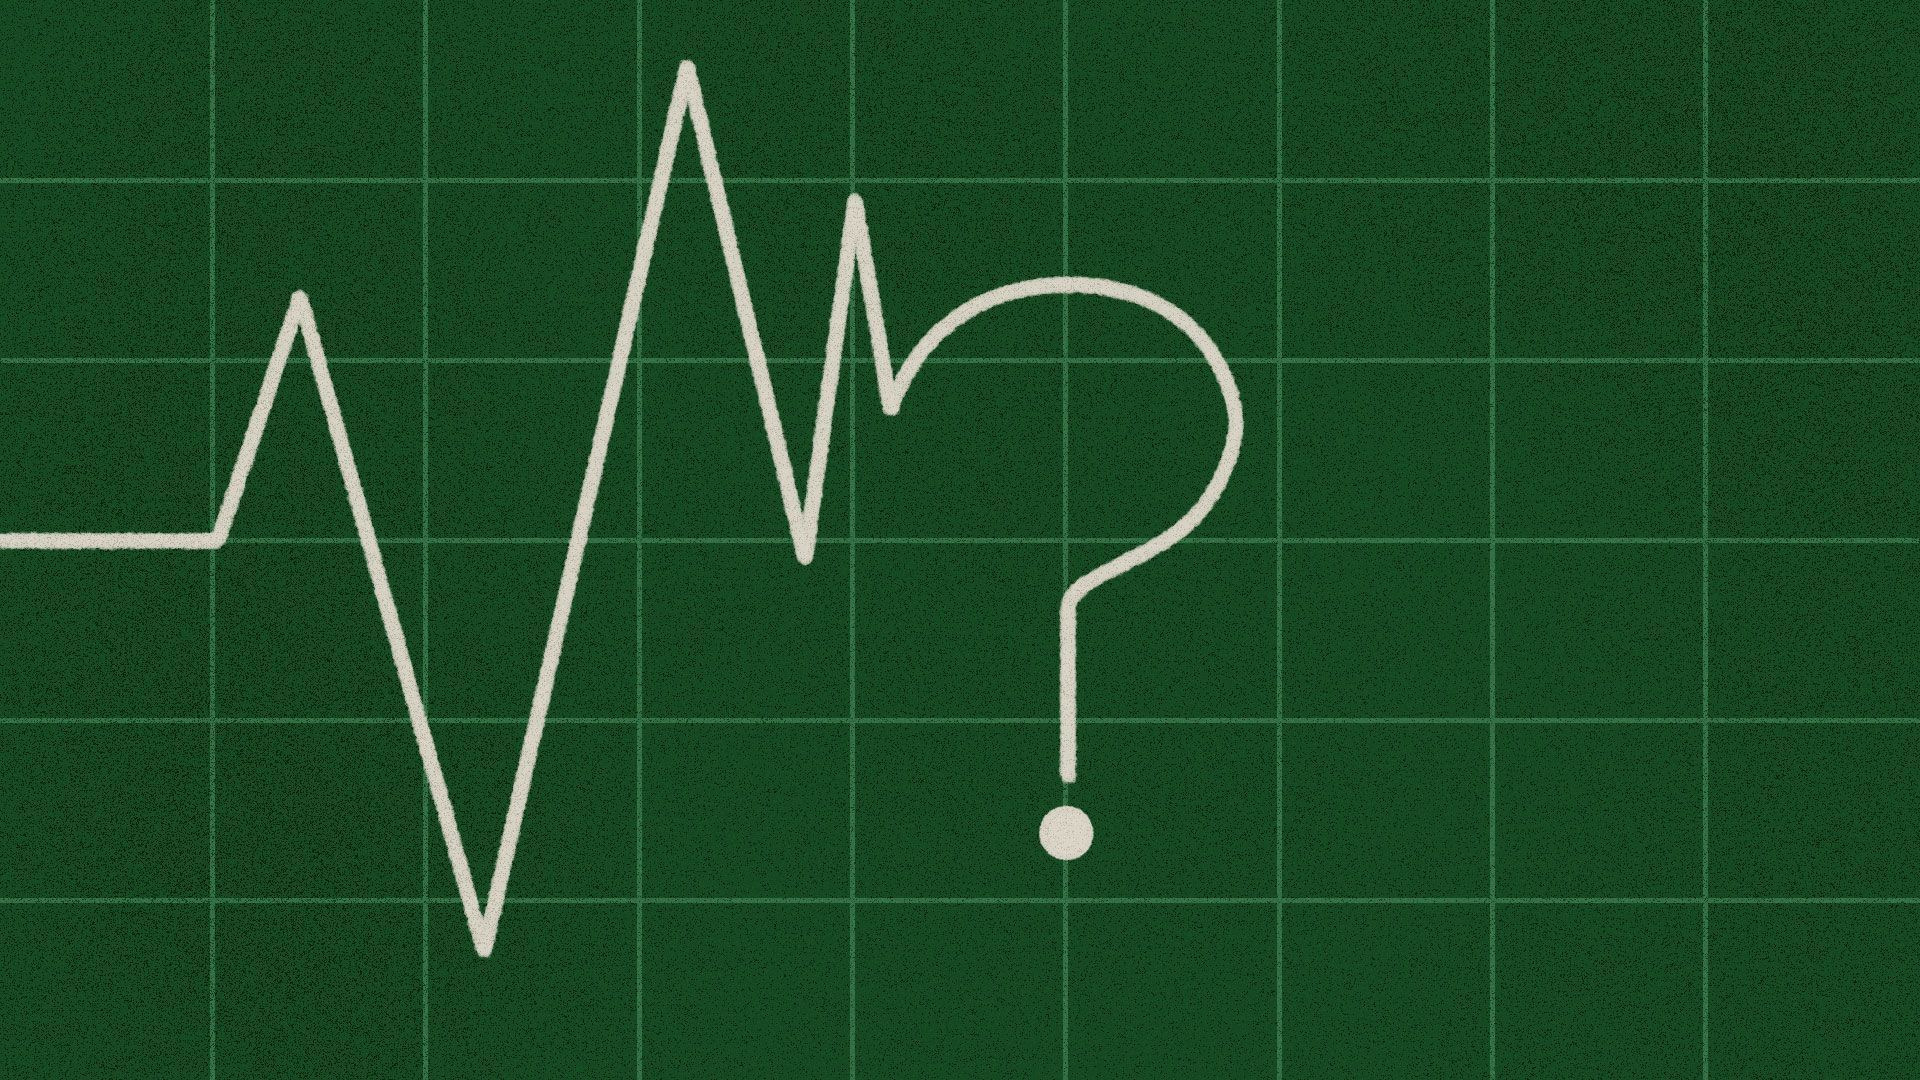 Illustration of a heart beat monitor screen with a question mark.